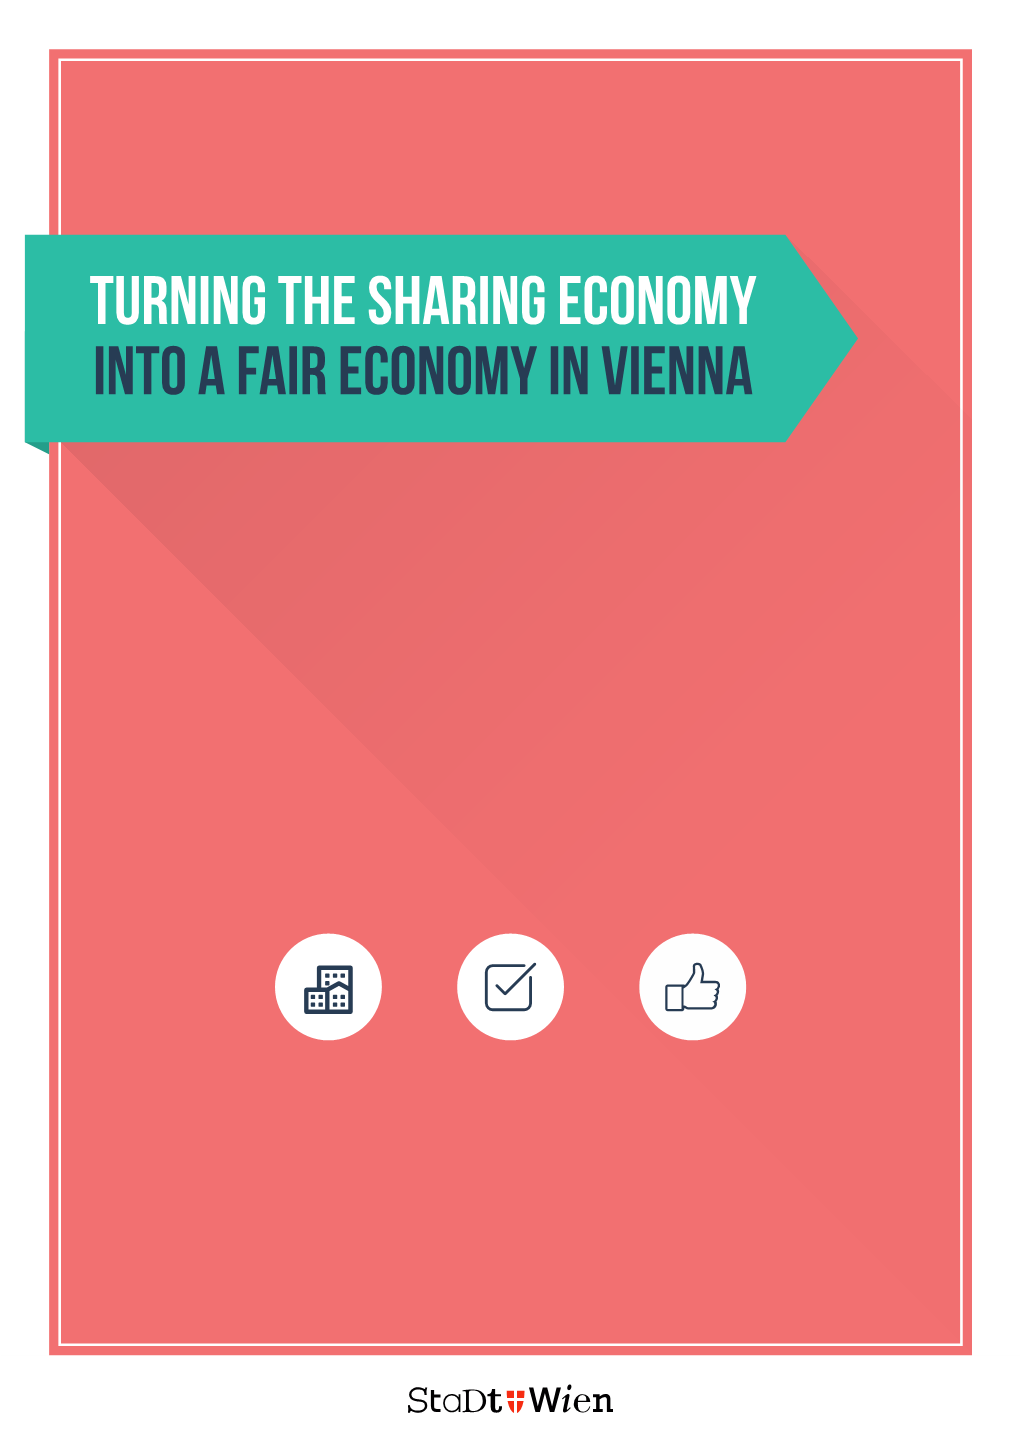 Turning the Sharing Economy Into a Fair Economy in Vienna the City of Vienna's Position On